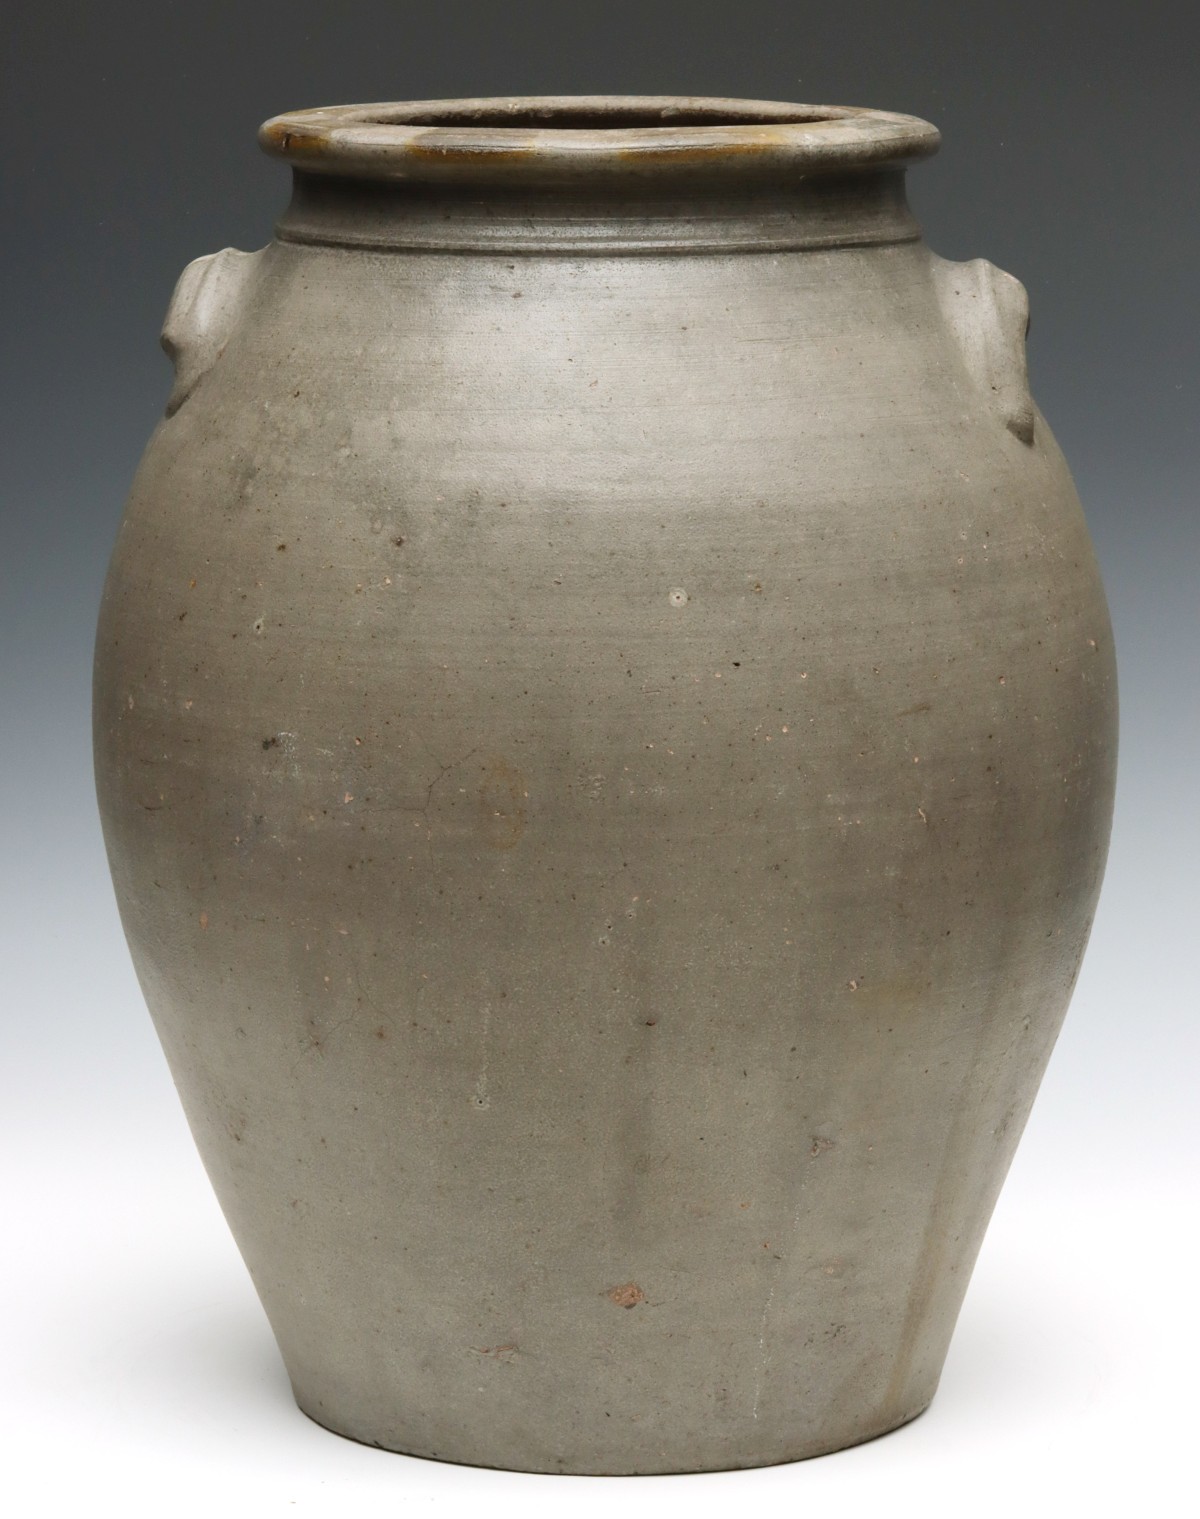 A LARGE 19TH C. MIDWESTERN OVOID STONEWARE CROCK